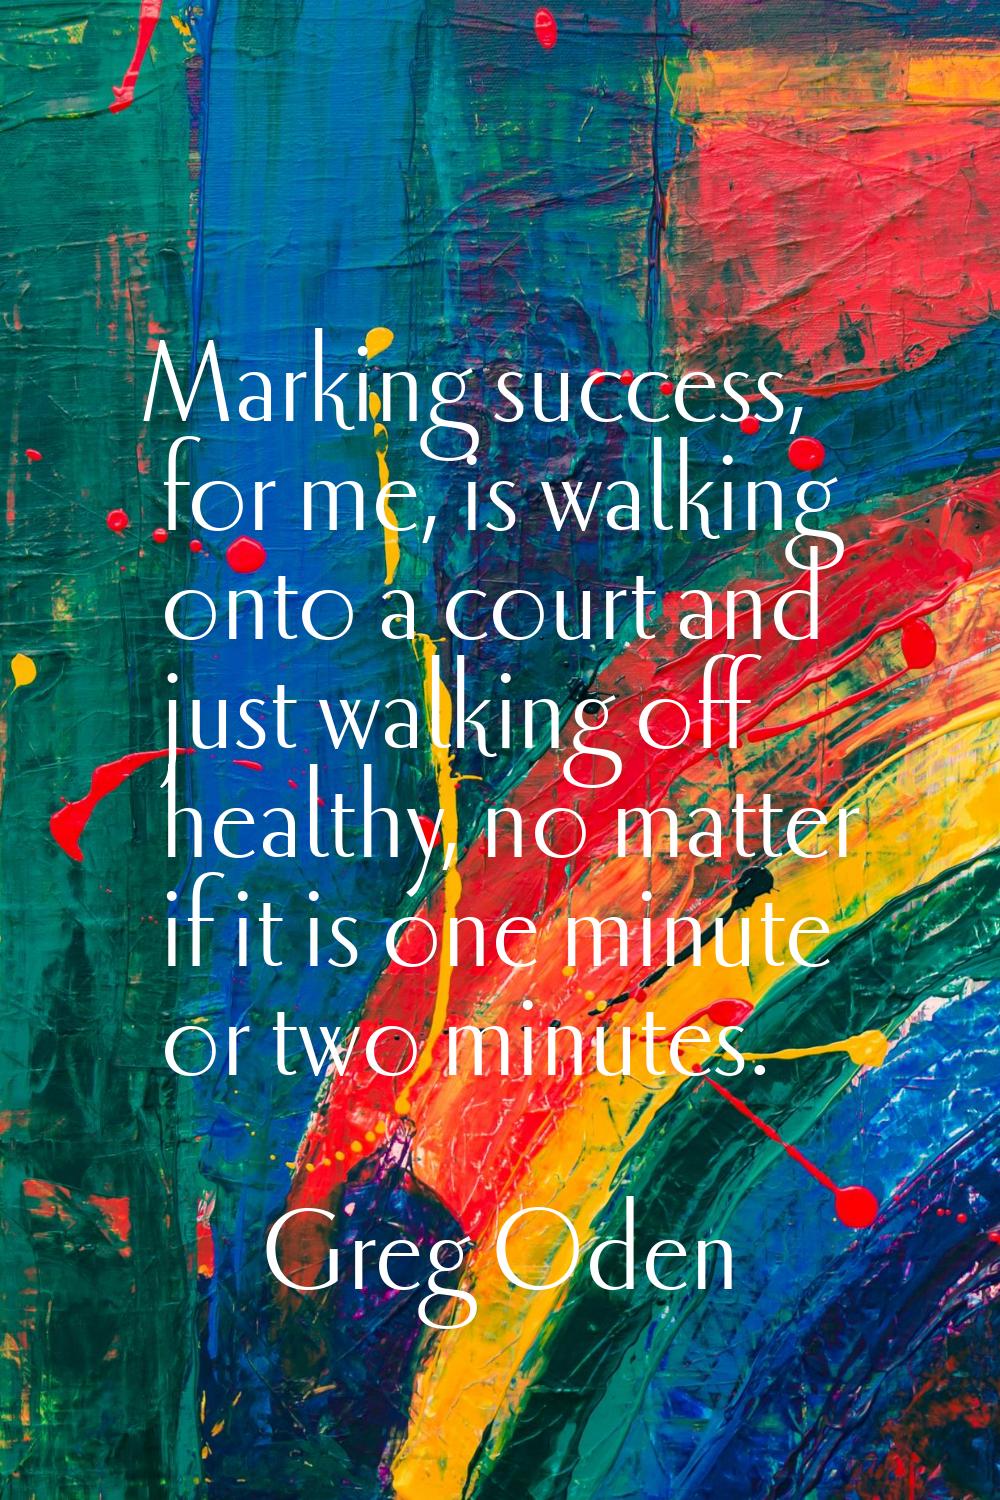 Marking success, for me, is walking onto a court and just walking off healthy, no matter if it is o